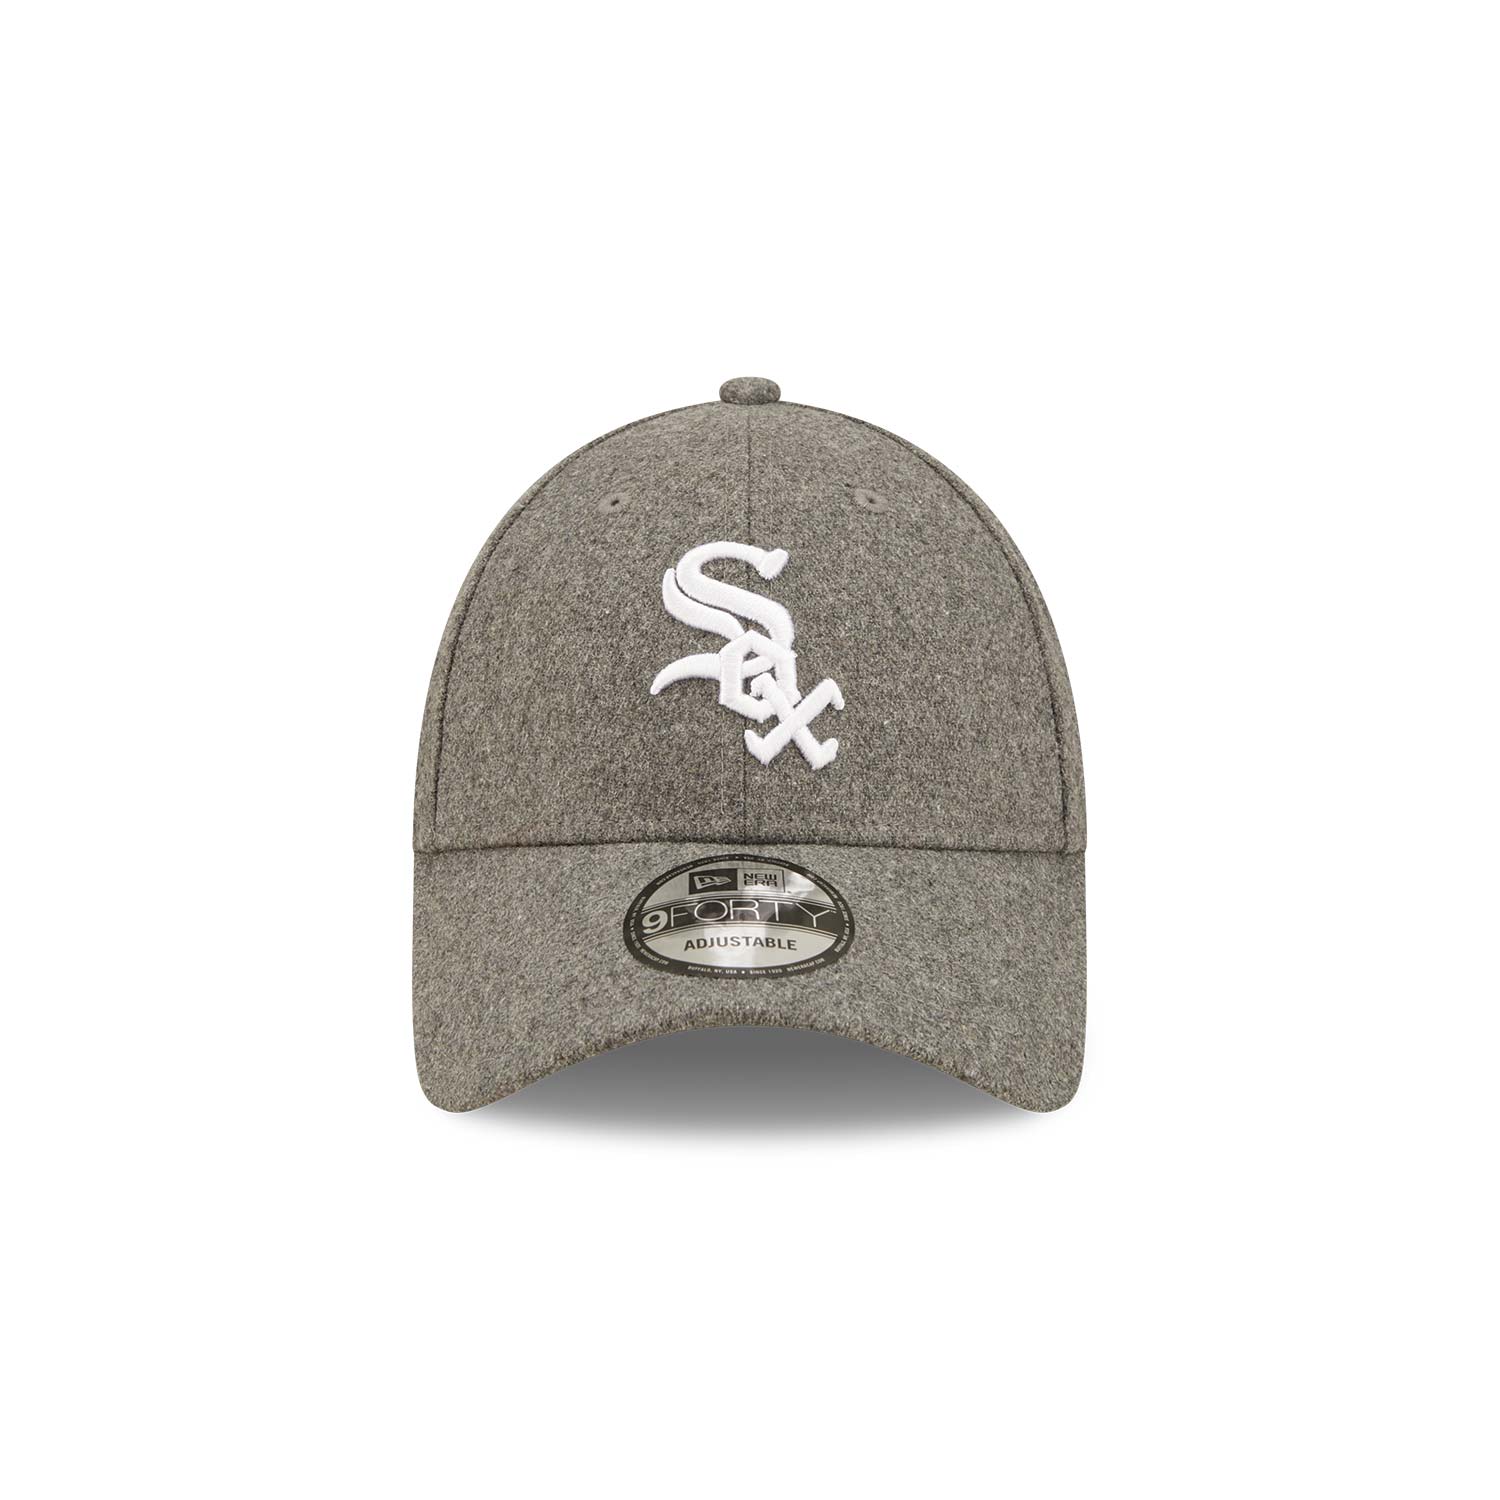 Chicago White Sox Grey Wool 9FORTY Adjustable Cap